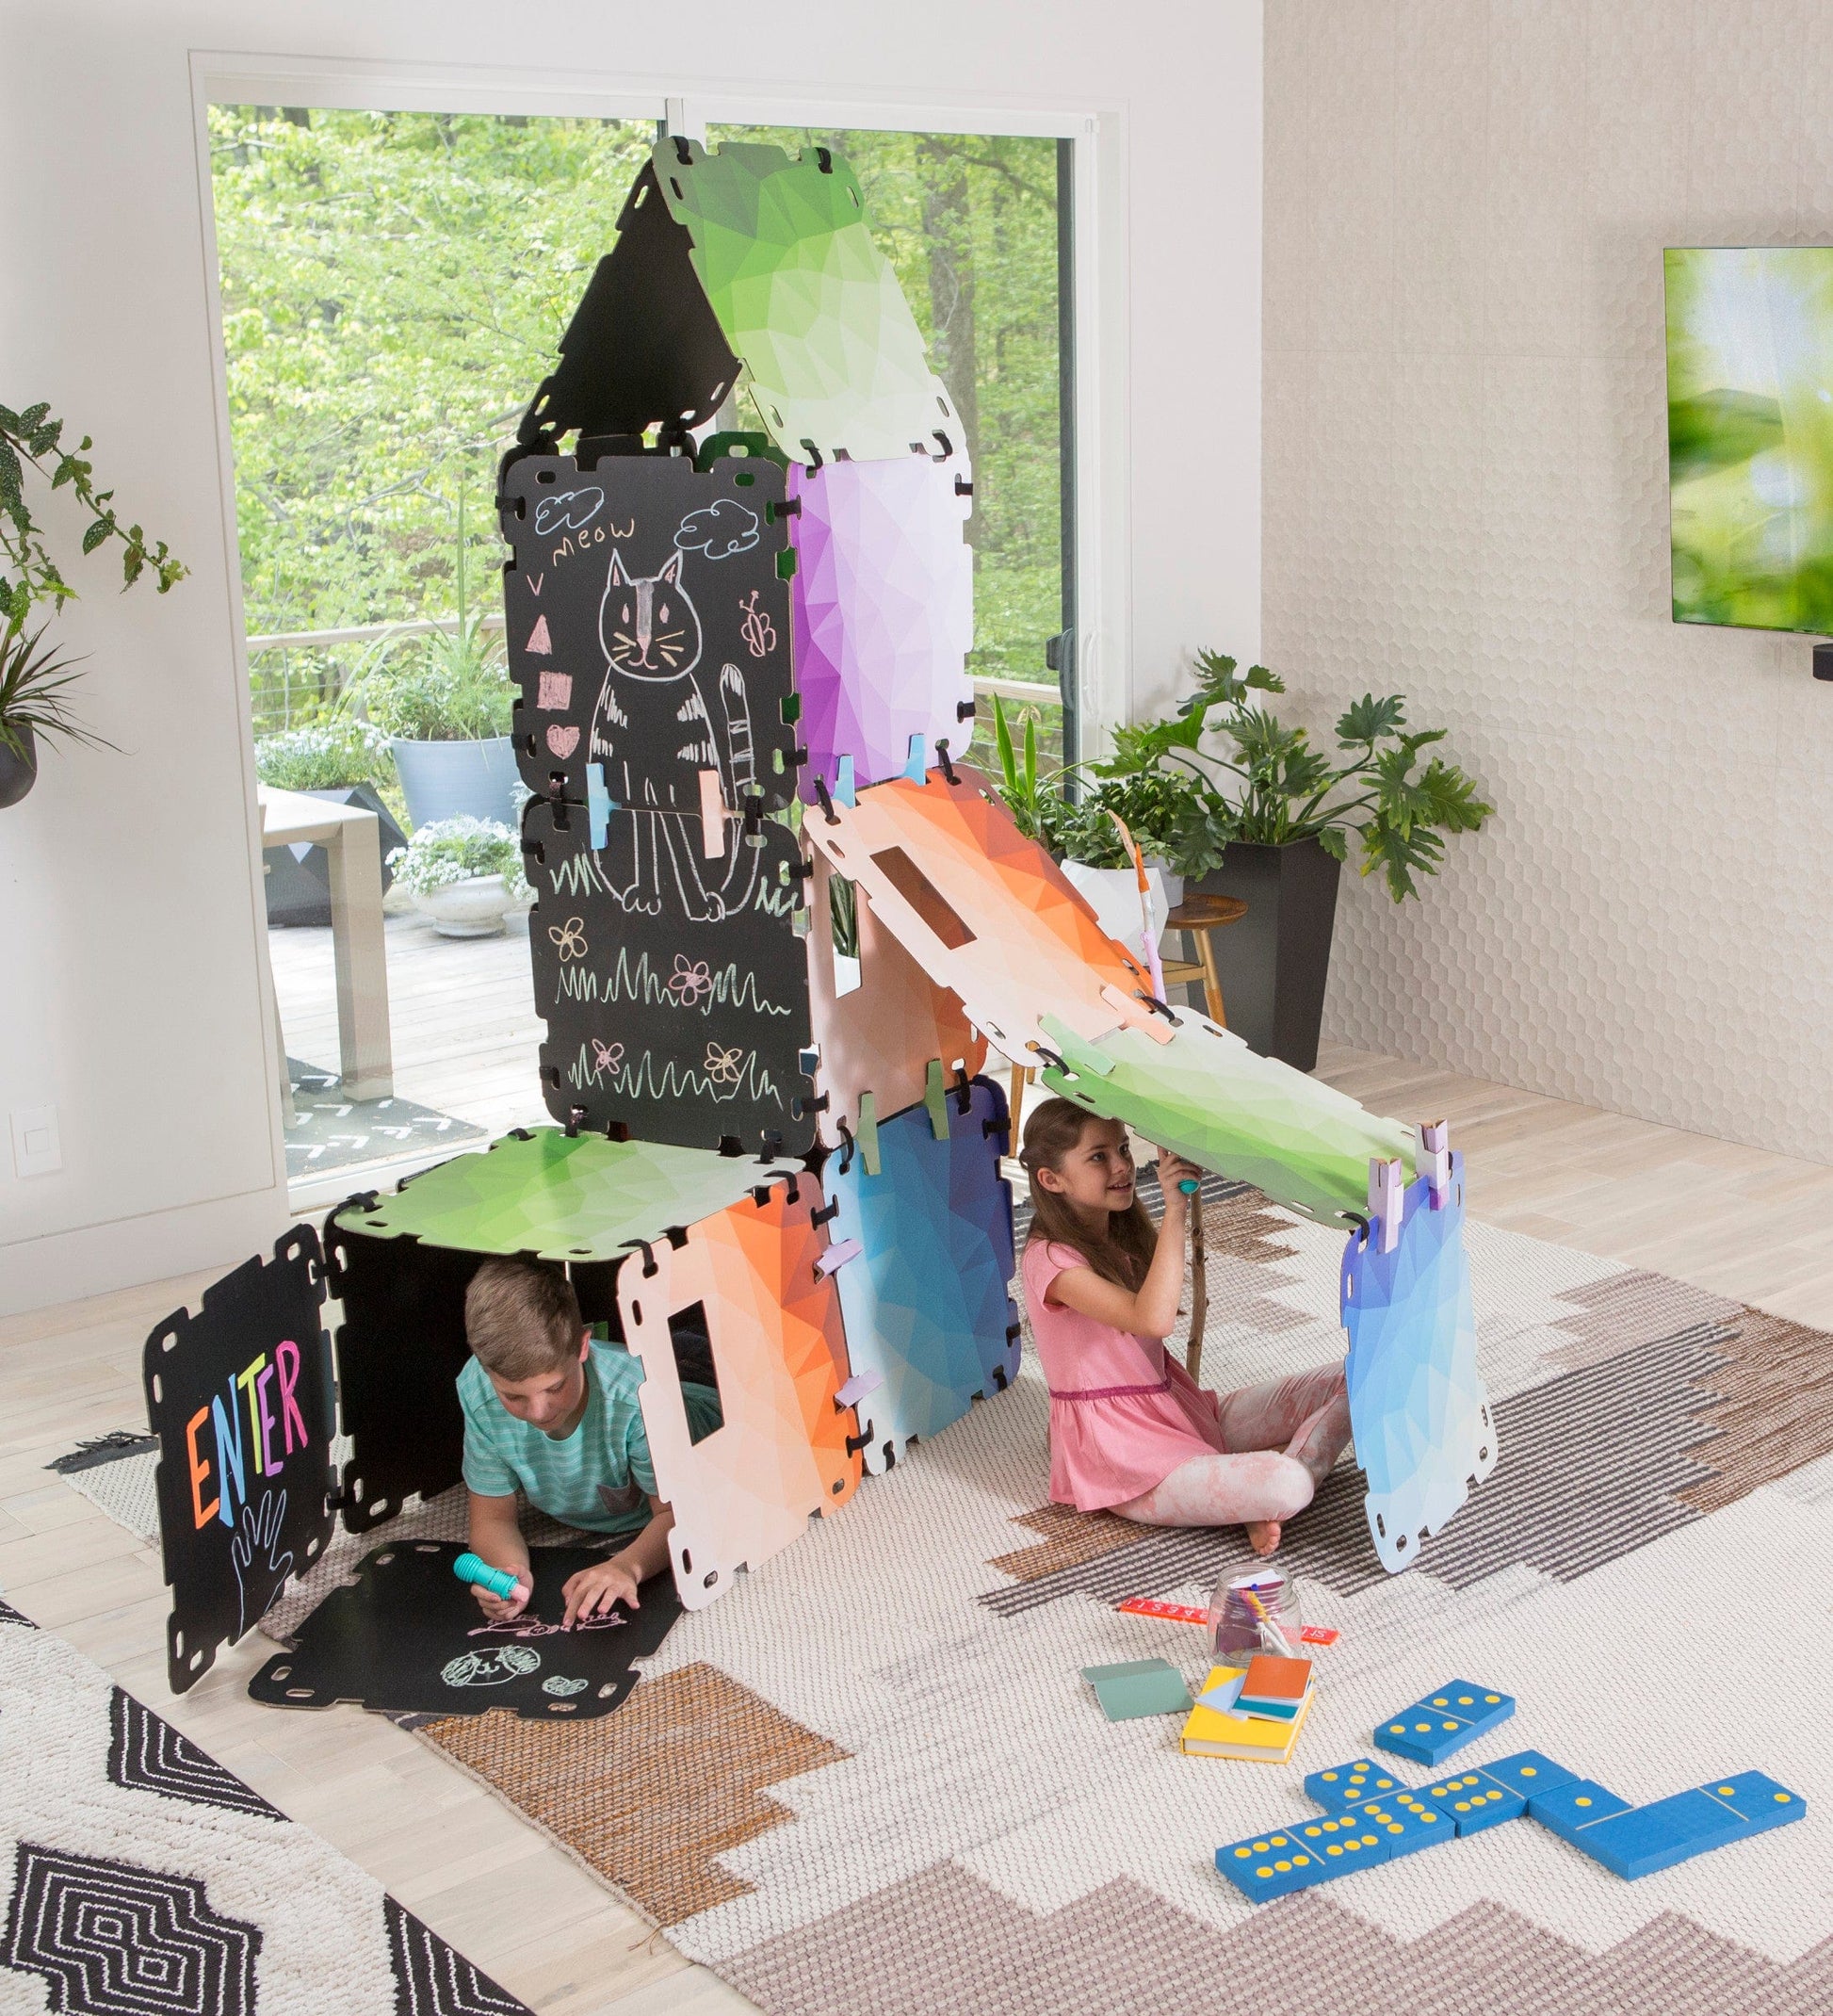 PopUp Play - Moving kids from screen time to play time. by PopUp Play —  Kickstarter